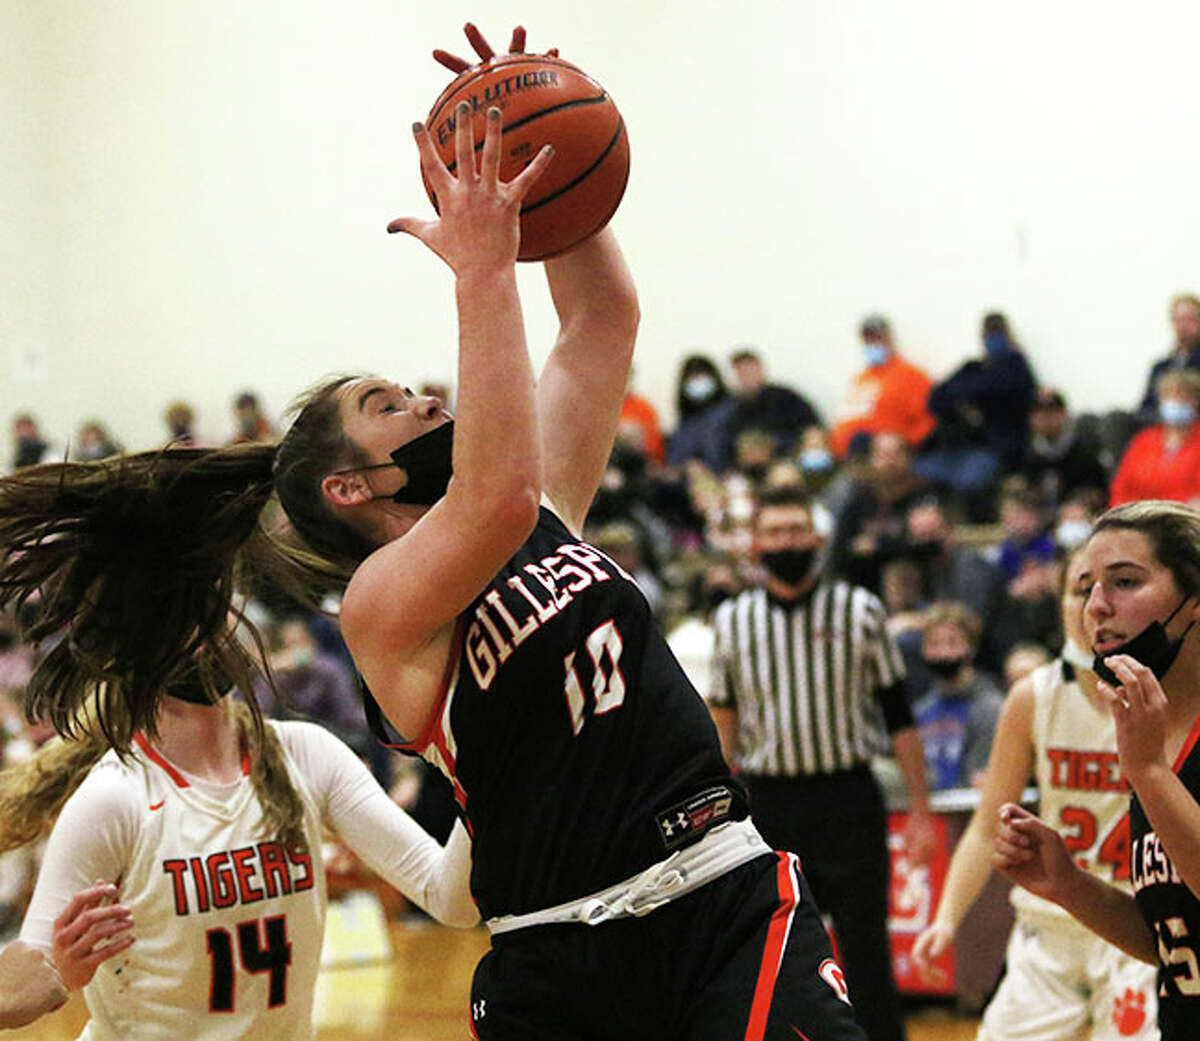 Gillespie's Madison Niemeyer (10), shown pulling down a rebound in a game against Greenfield at the Carlinville Tourney, scored 10 points on Wednesday in a loss to the host Cavaliers at Carlinville.